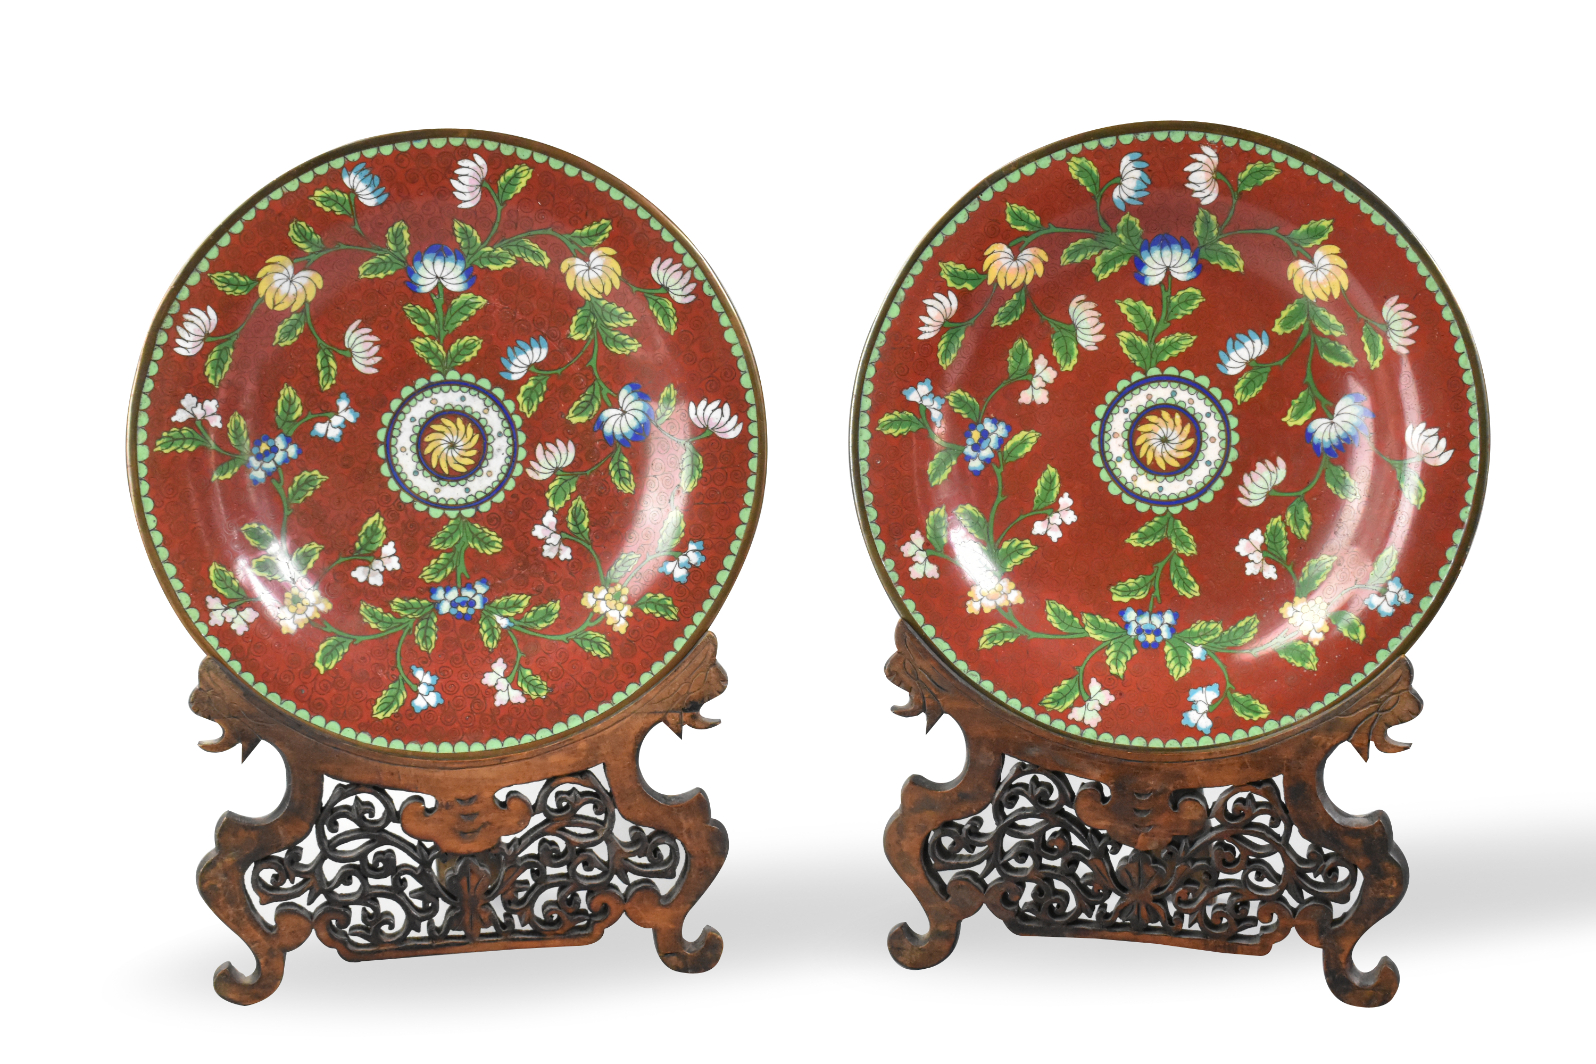 PAIR OF CHINESE CLOISONNE PLATES 301cfa